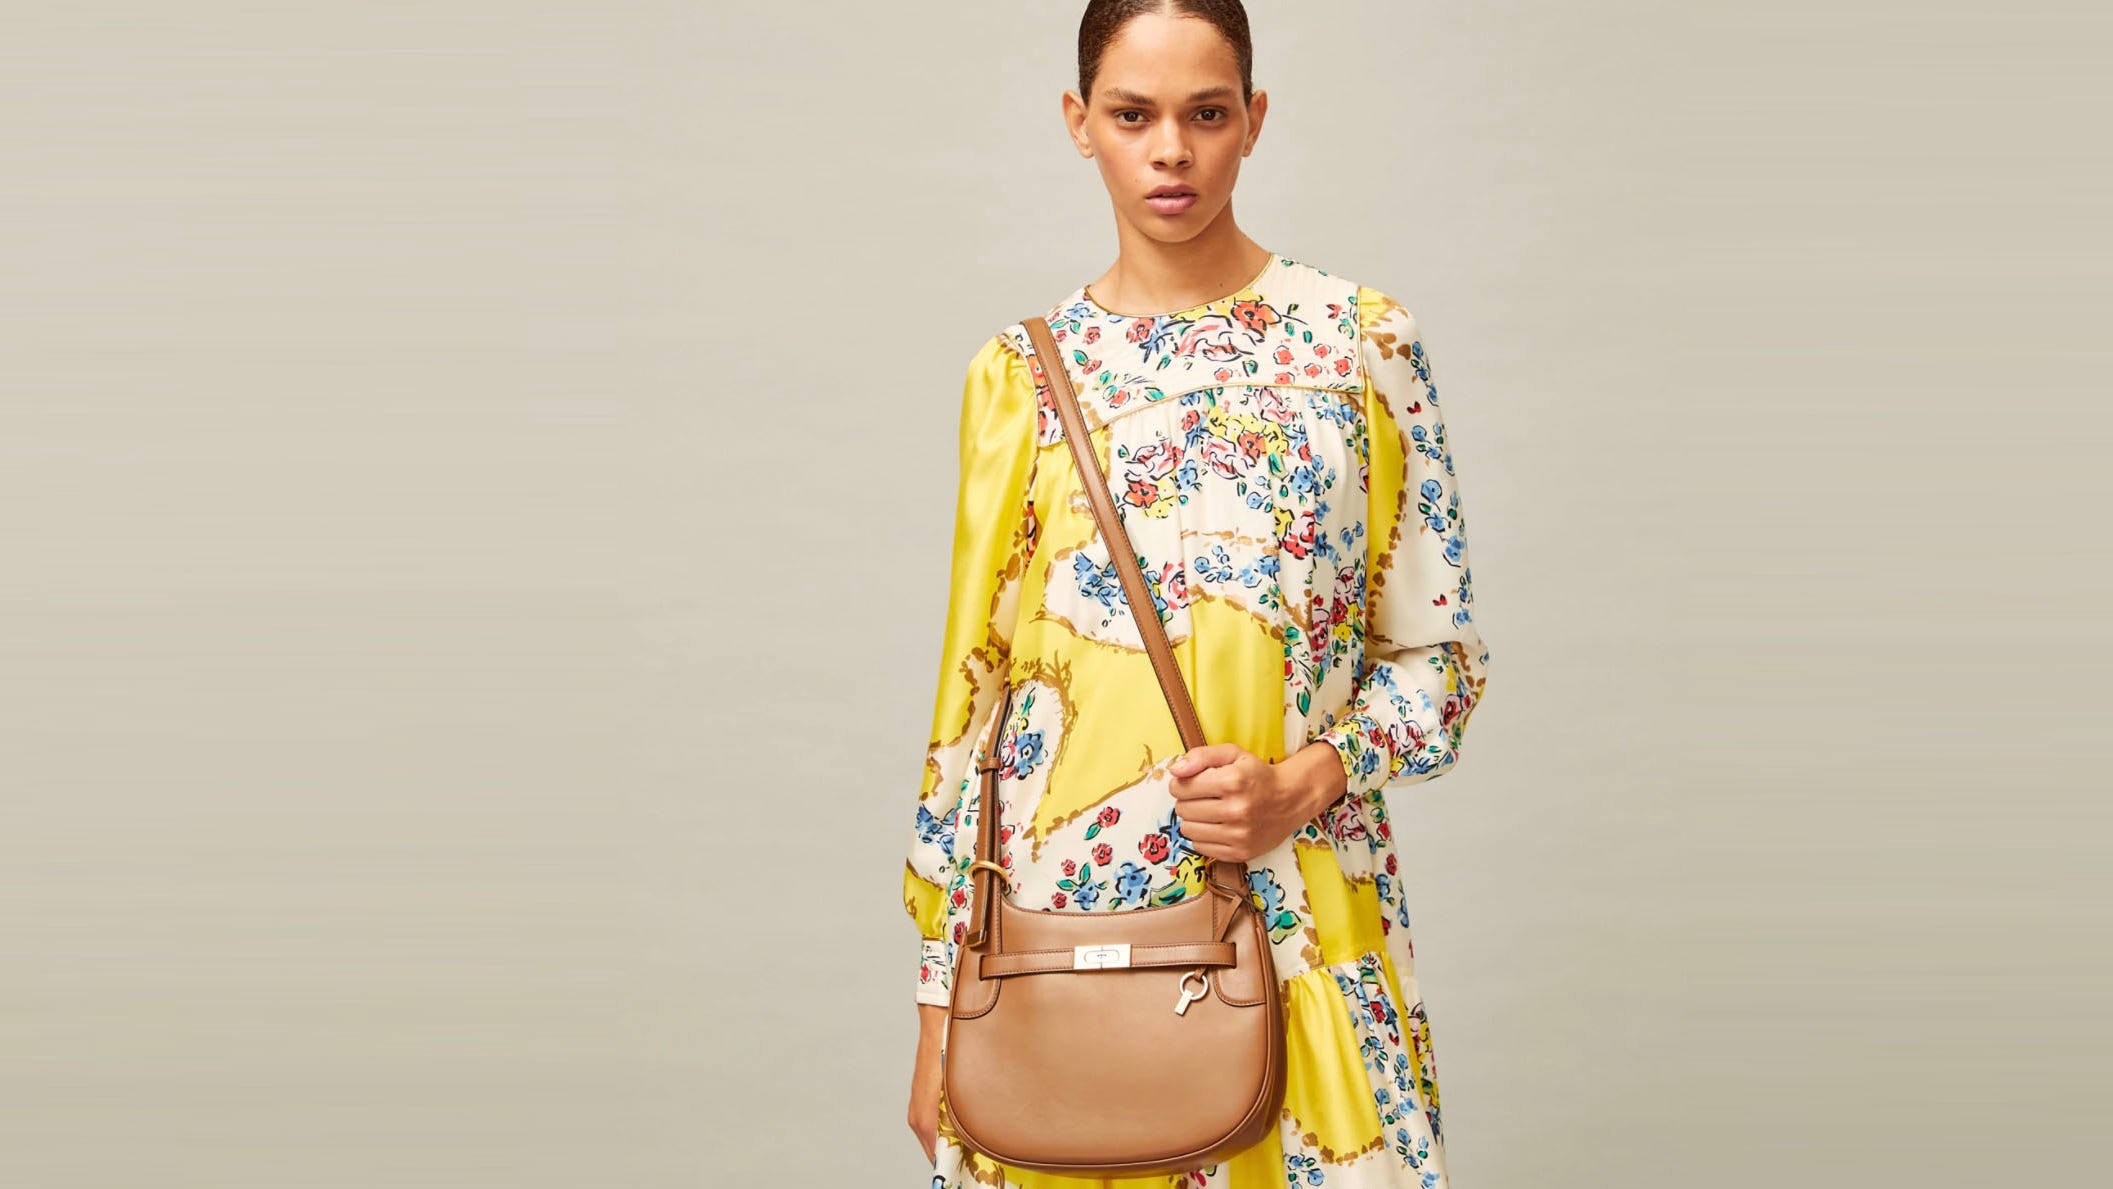 Tory Burch purse: Get an extra 25% off select styles at the Semi-Annual Sale